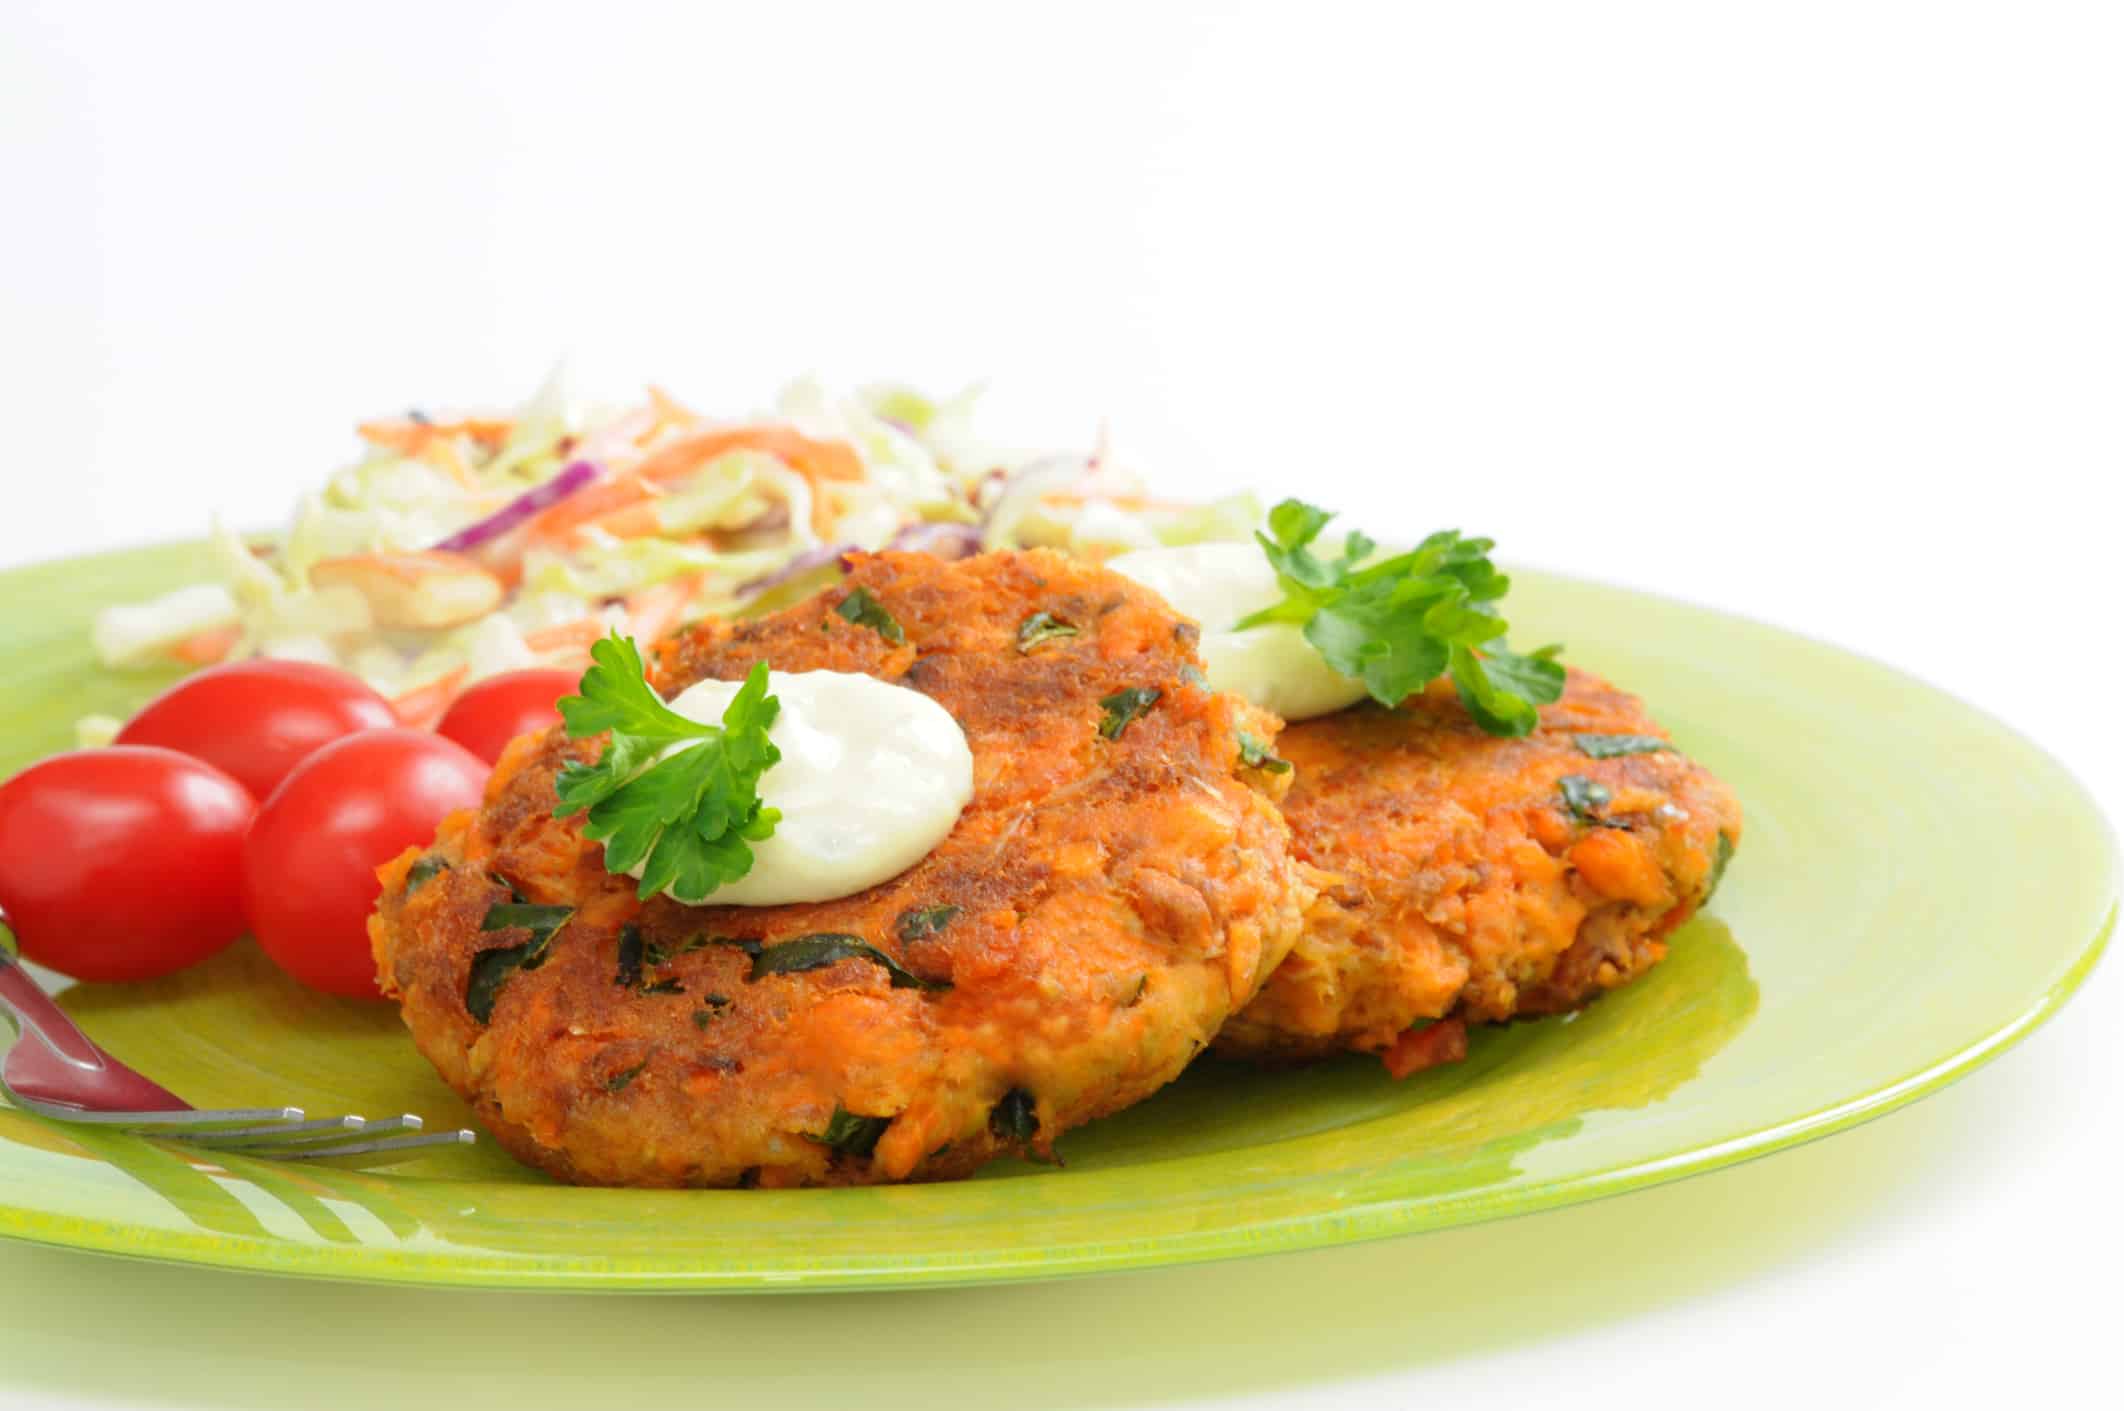 Tasty salmon burgers served with vegetables